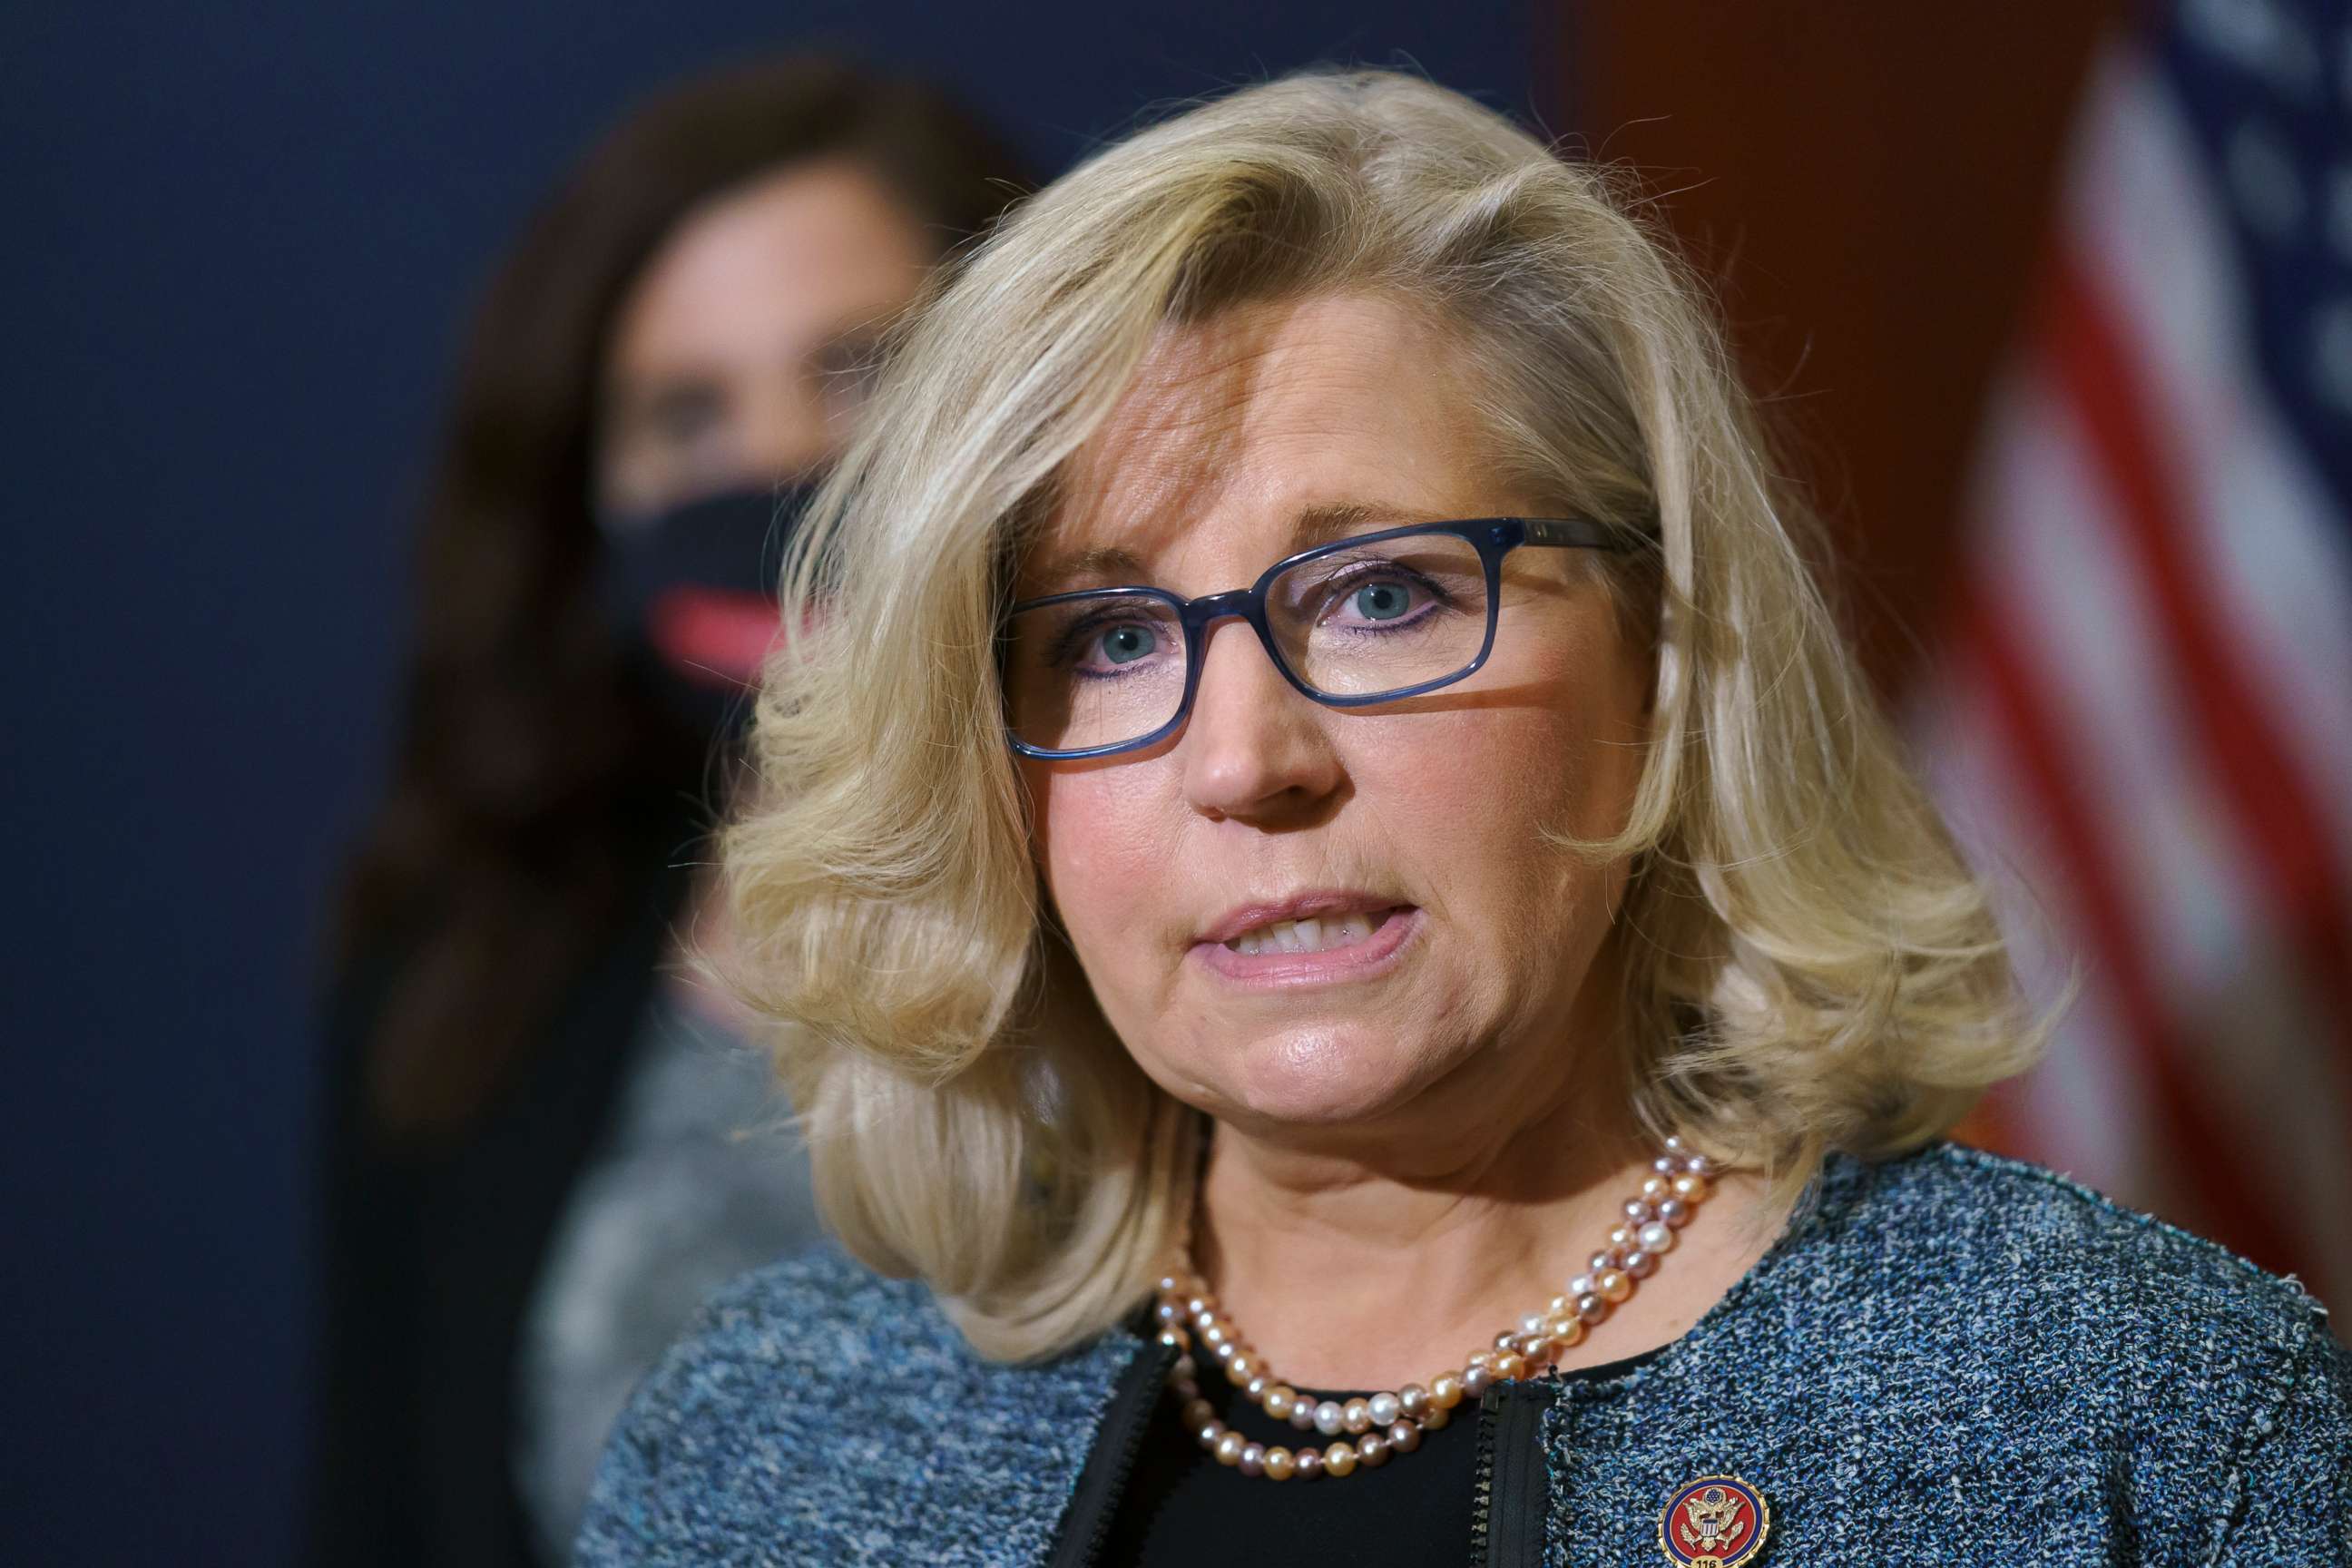 PHOTO: Rep. Liz Cheney speaks with reporters following a GOP strategy session on Capitol Hill in Washington, April 20, 2021.